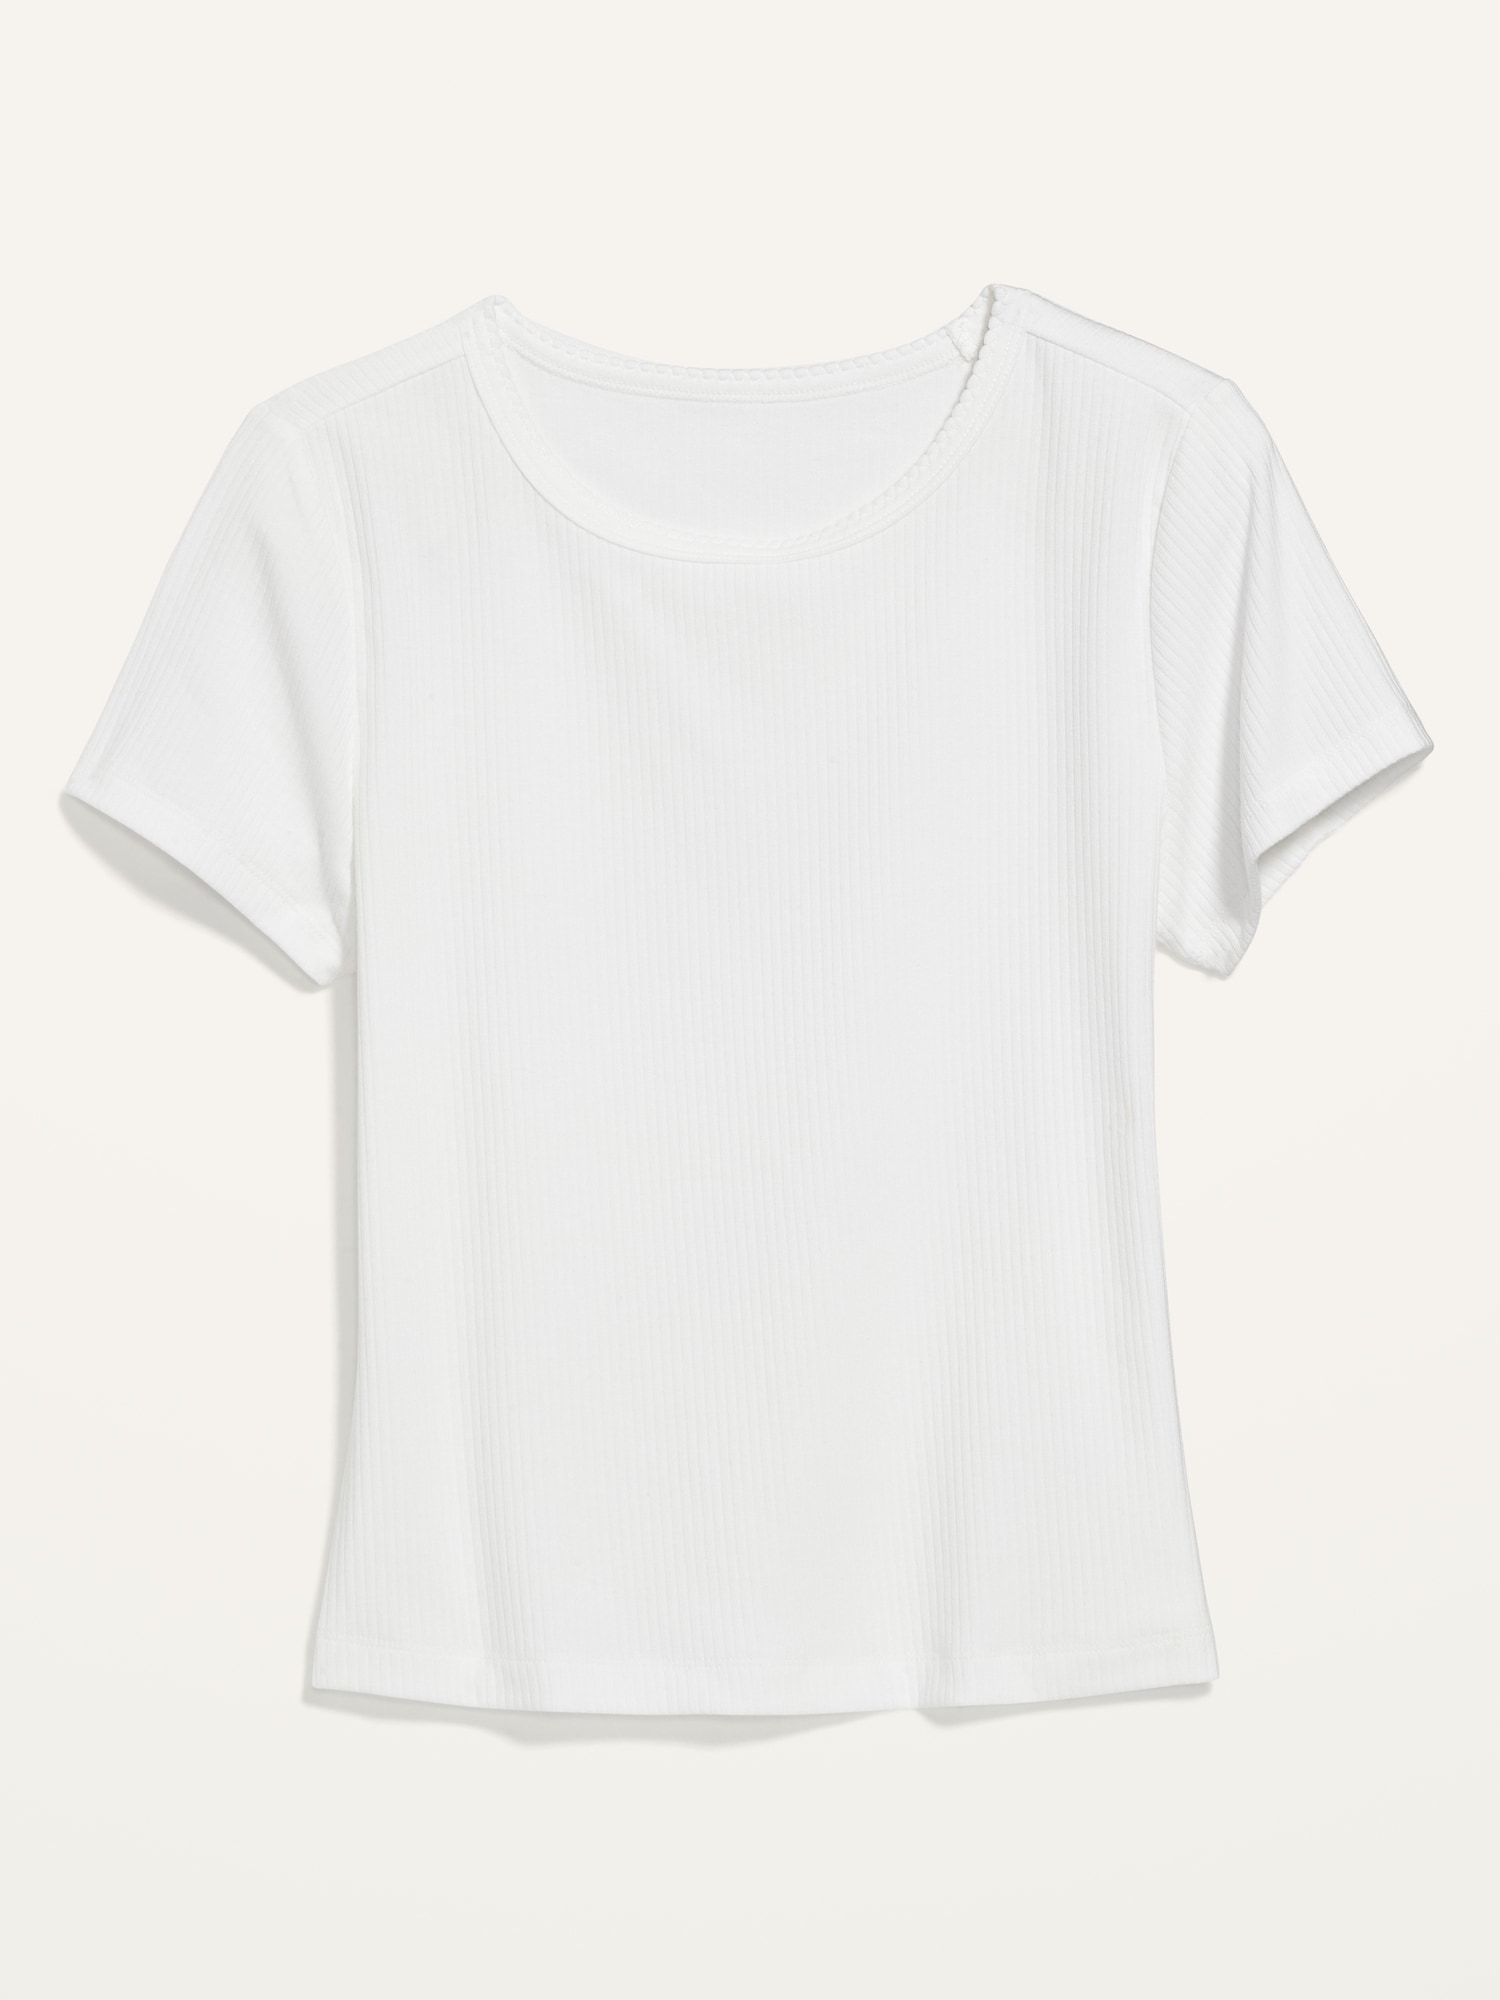 Fitted Short-Sleeve Cropped Rib-Knit T-Shirt | Old Navy